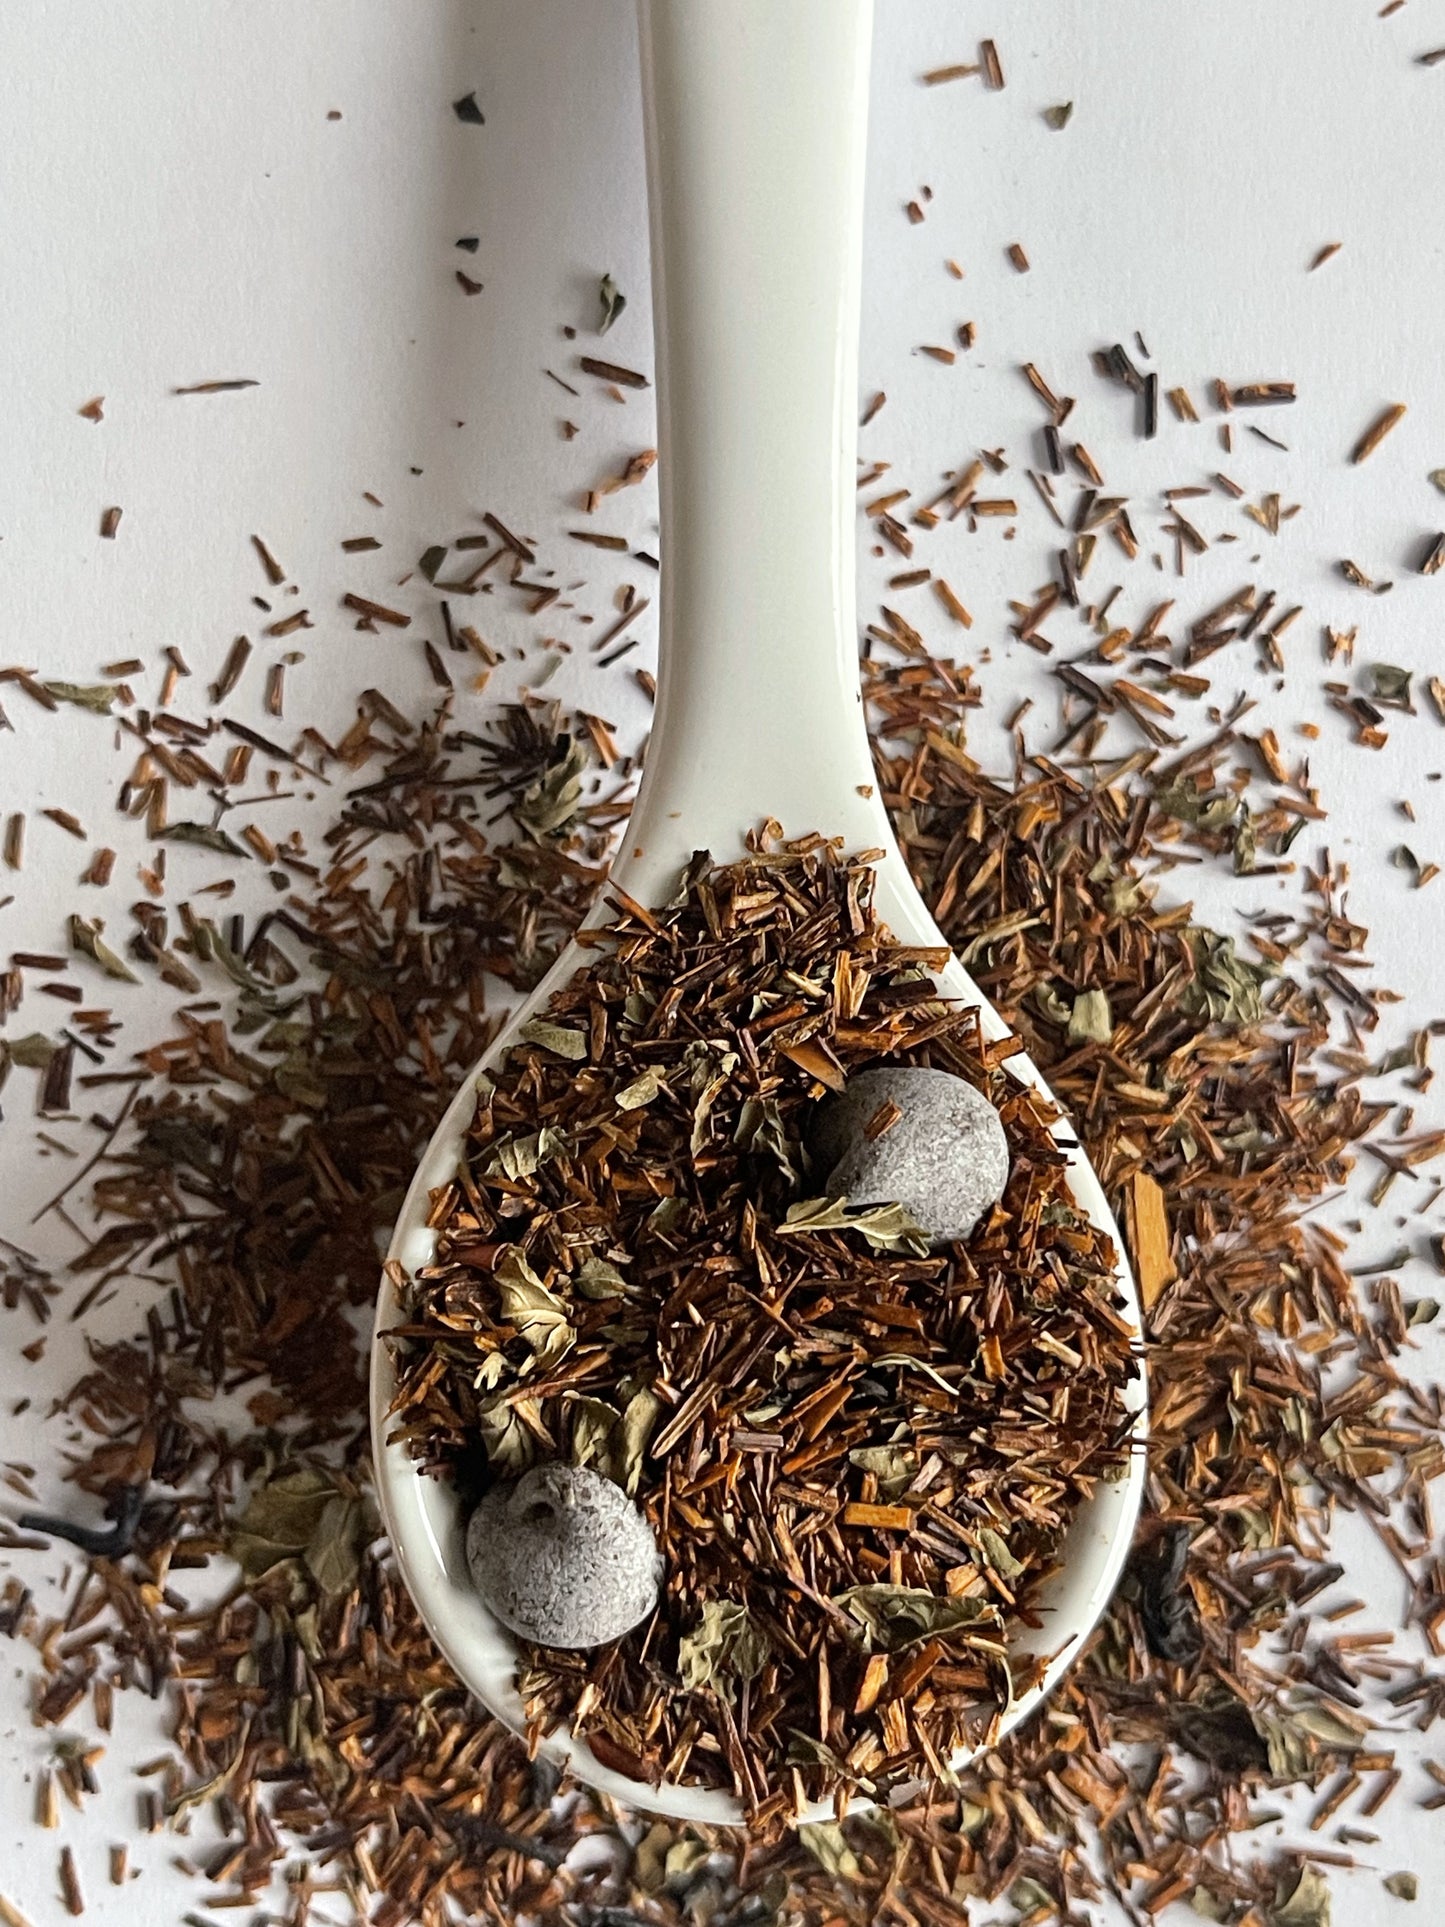 Herbal tea blend with rooibos, peppermint, chocolate morsels, and natural vanilla.